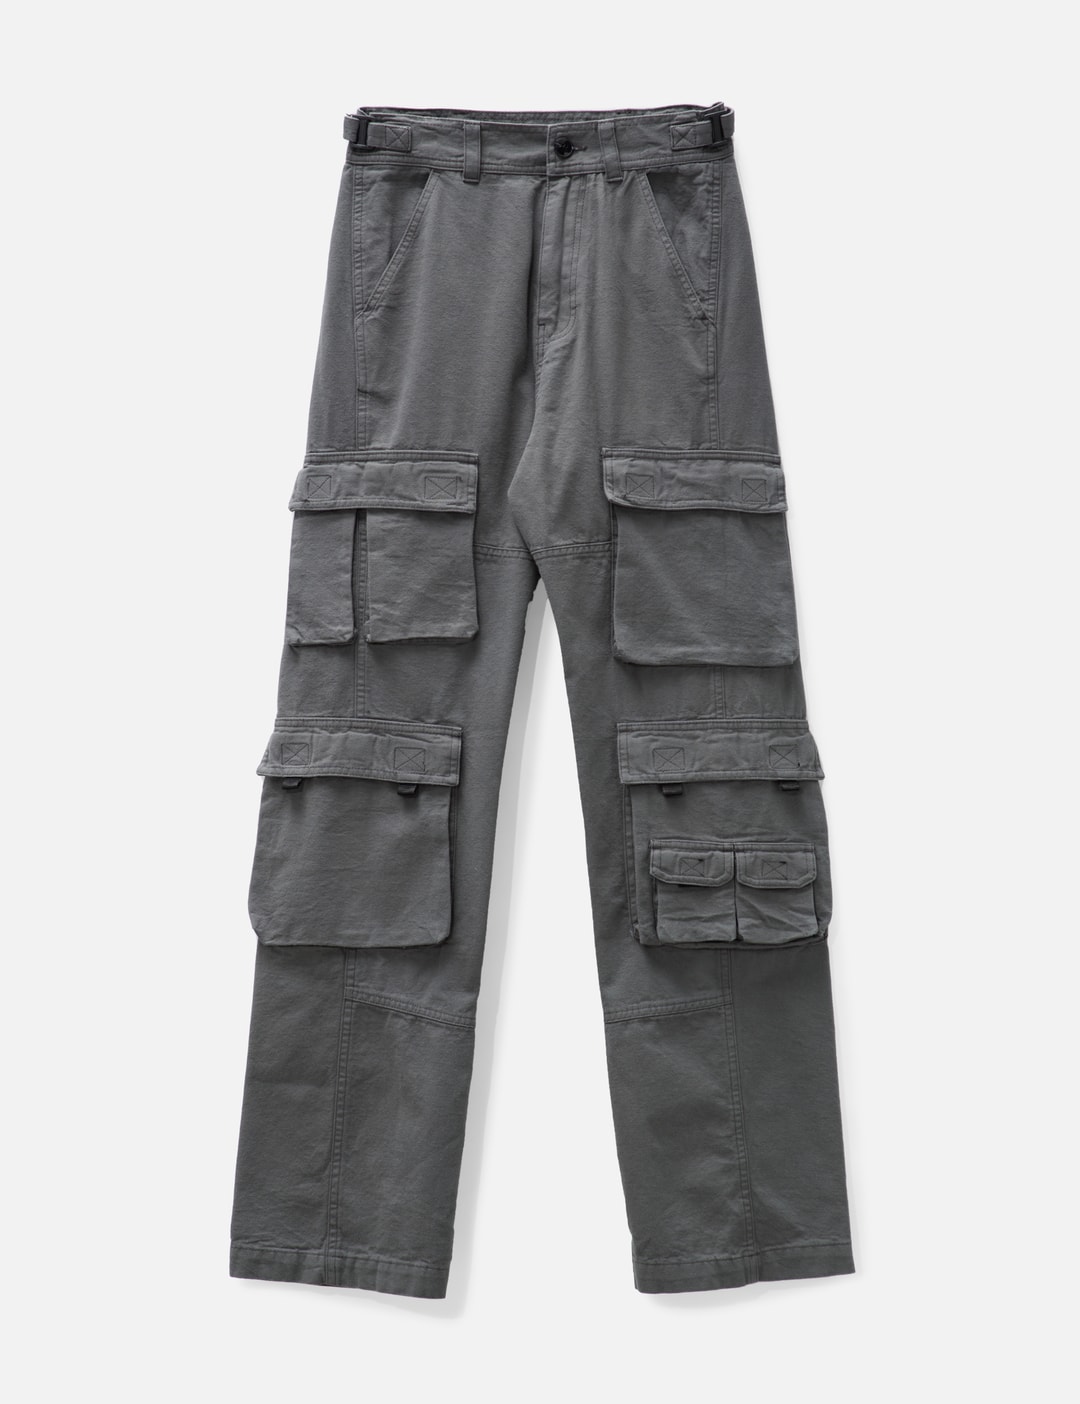 Martine Rose - Twist Seam Cargo Trousers | HBX - Globally Curated ...